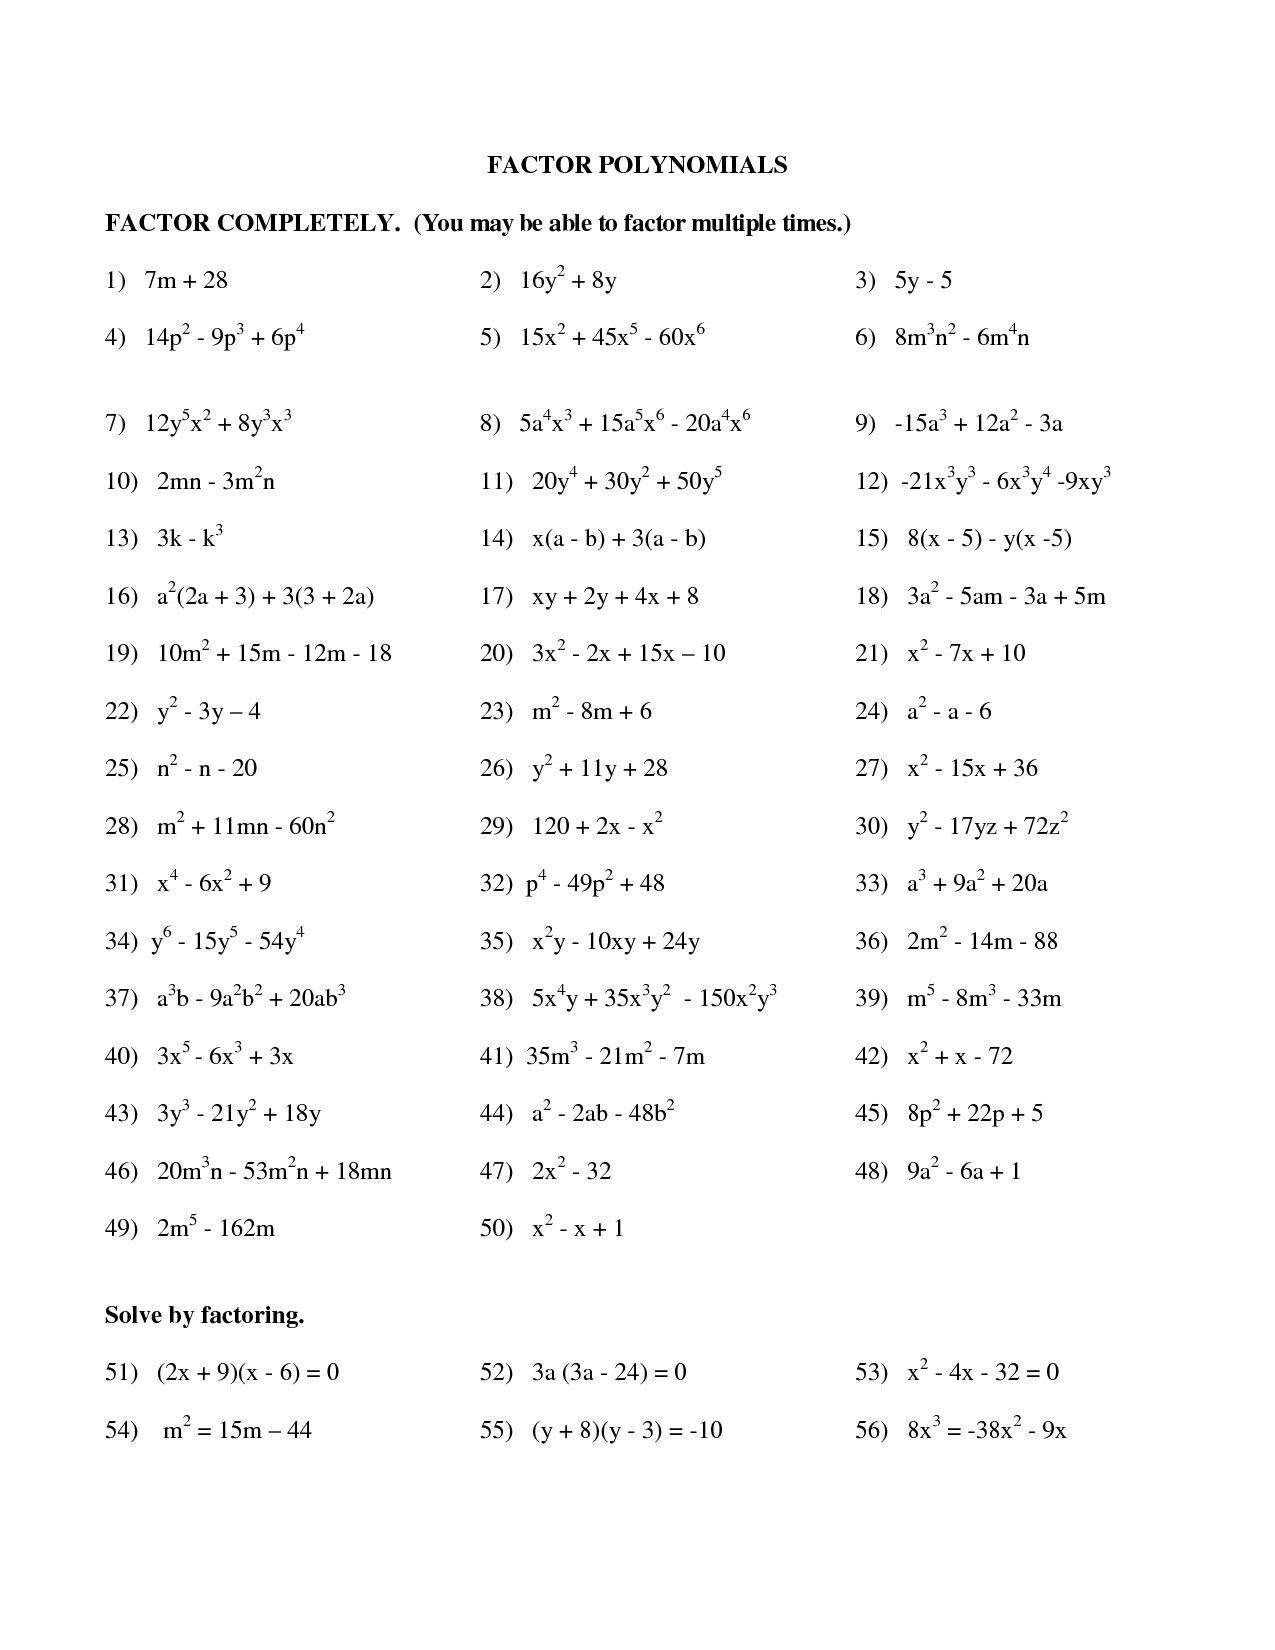 Factoring Polynomials Worksheet Answers New Factoring Polynomials Worksheet